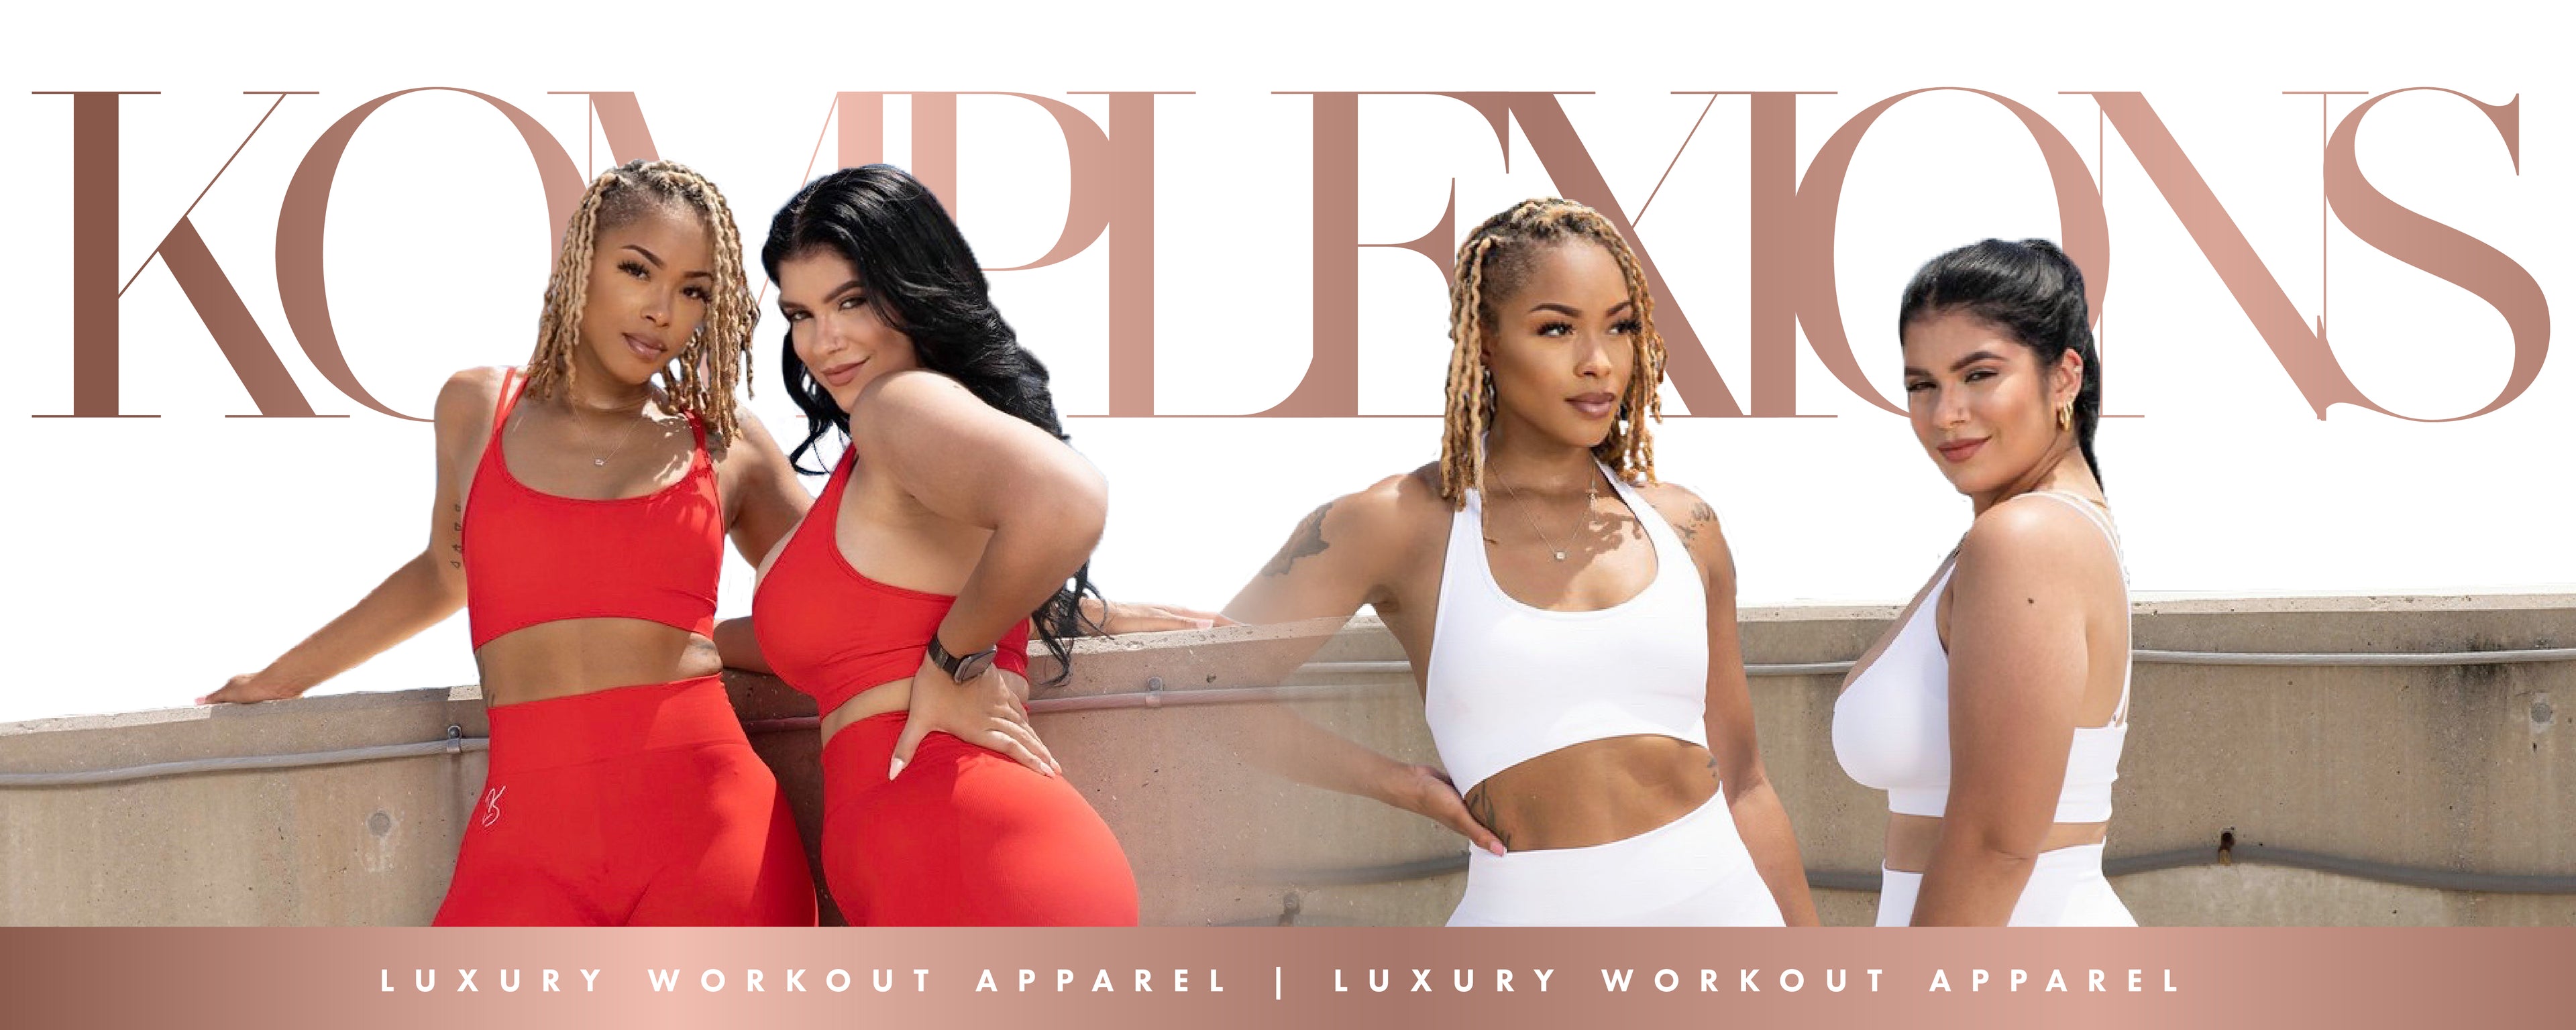 simple luxury banner with 2 models wearing 2 different color sets for the new apparel collection